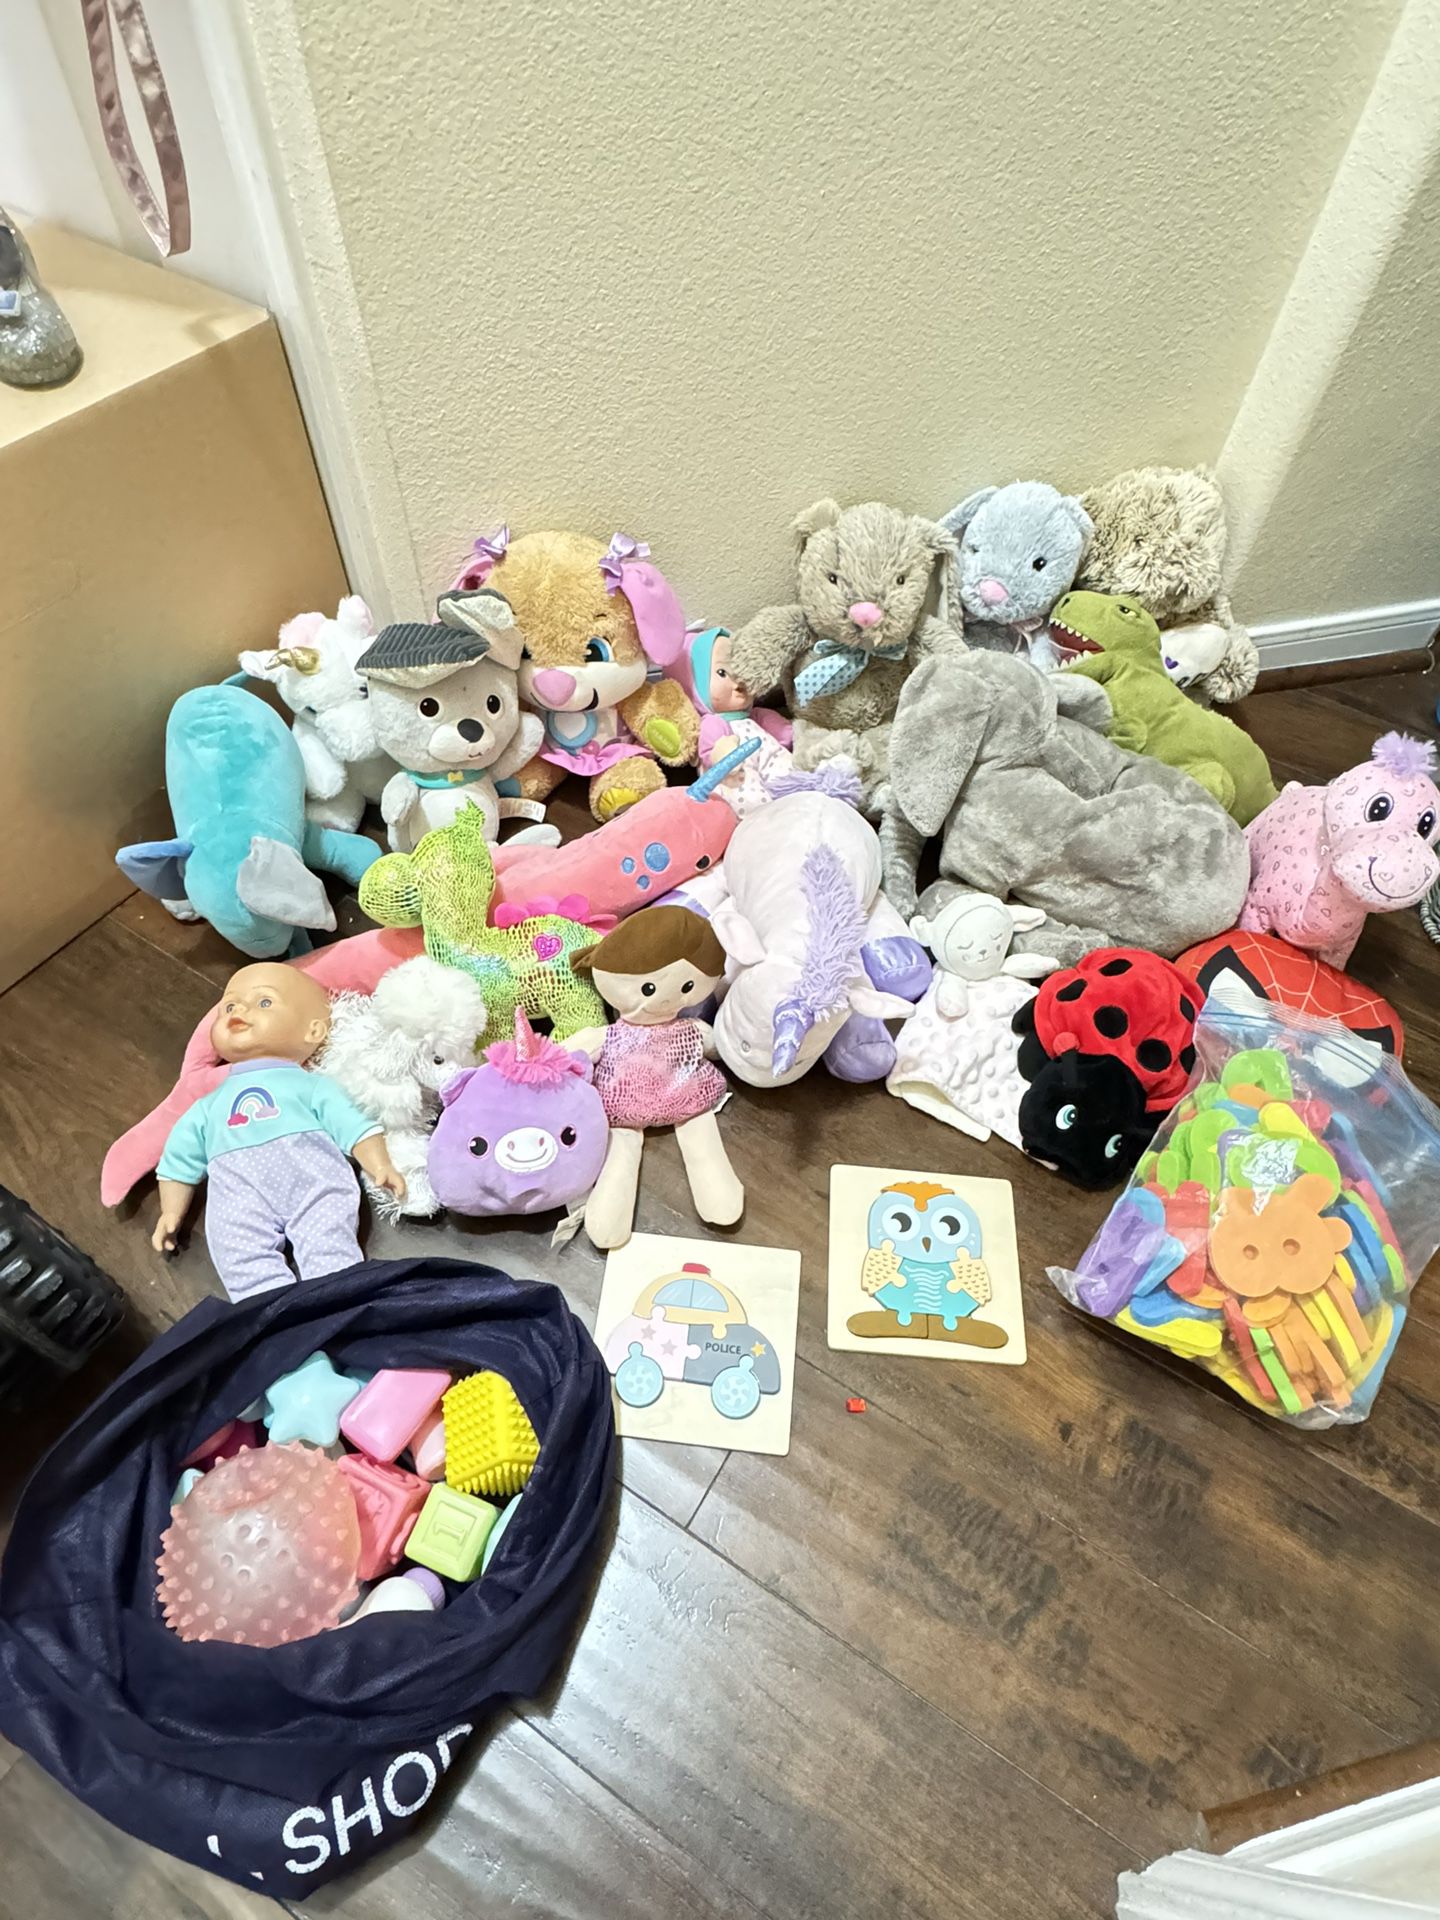 $16 - Laugh And Learn, Stuffed Animals, Bath Foam Toys, Puzzles 